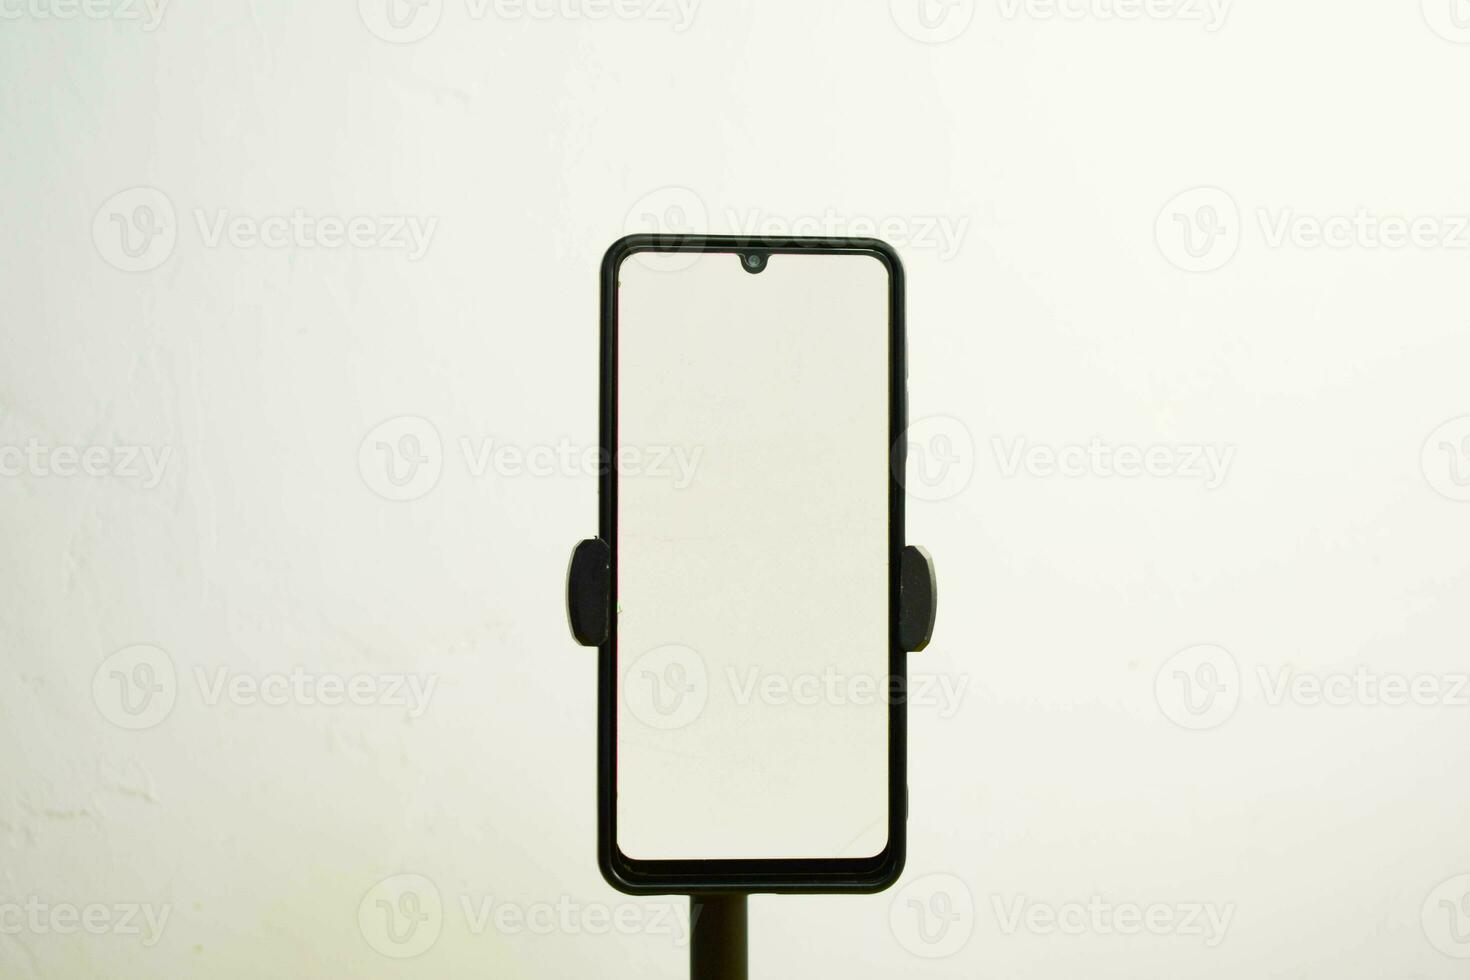 Portrait phone with white screen fixed to tripod on white background, for mockup design. photo